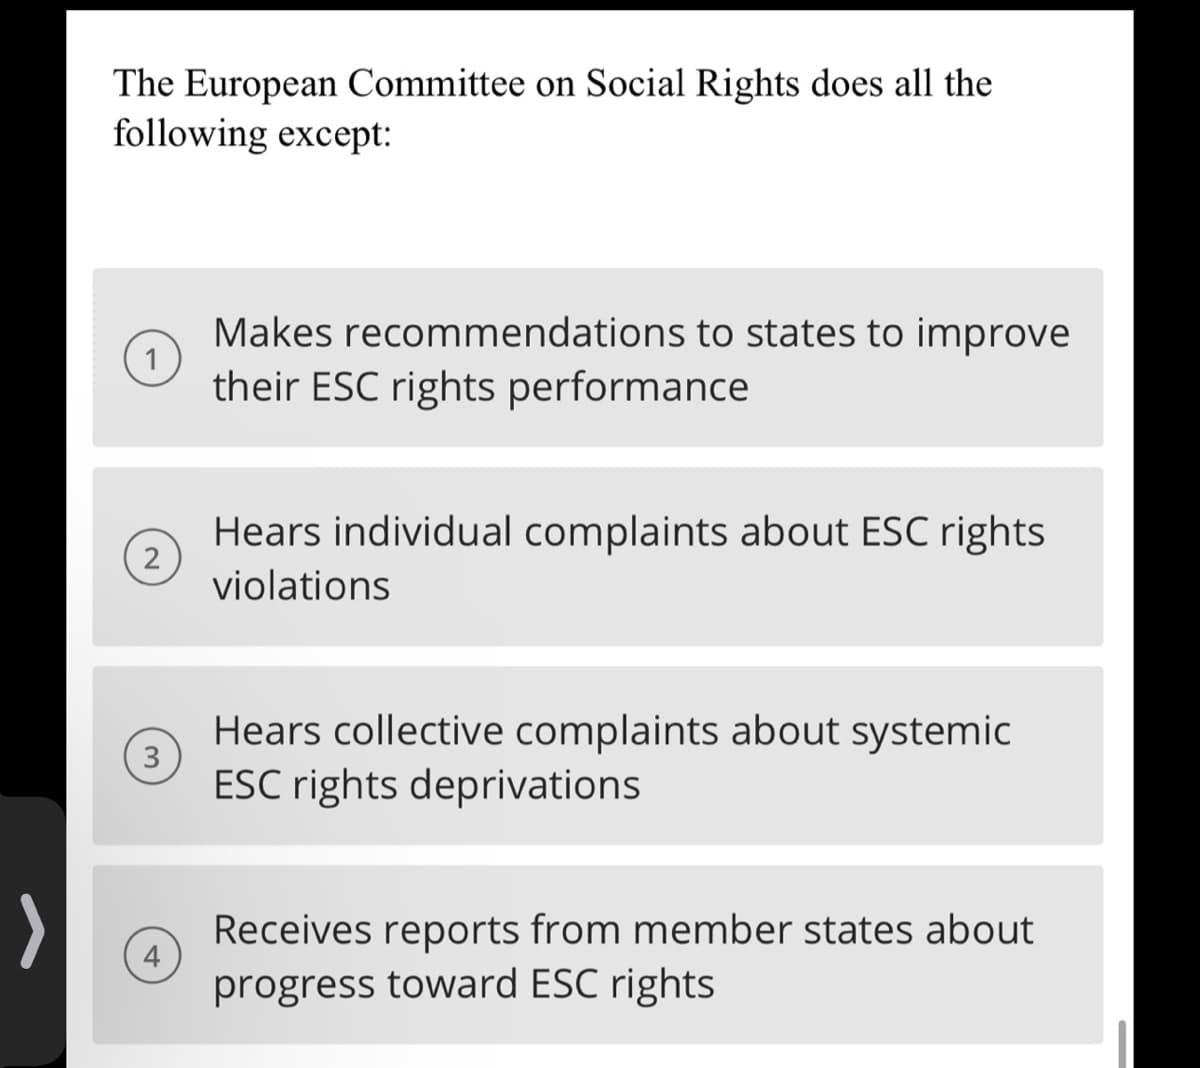 >
The European Committee on Social Rights does all the
following except:
2
3
Makes recommendations to states to improve
their ESC rights performance
Hears individual complaints about ESC rights
violations
Hears collective complaints about systemic
ESC rights deprivations
Receives reports from member states about
progress toward ESC rights